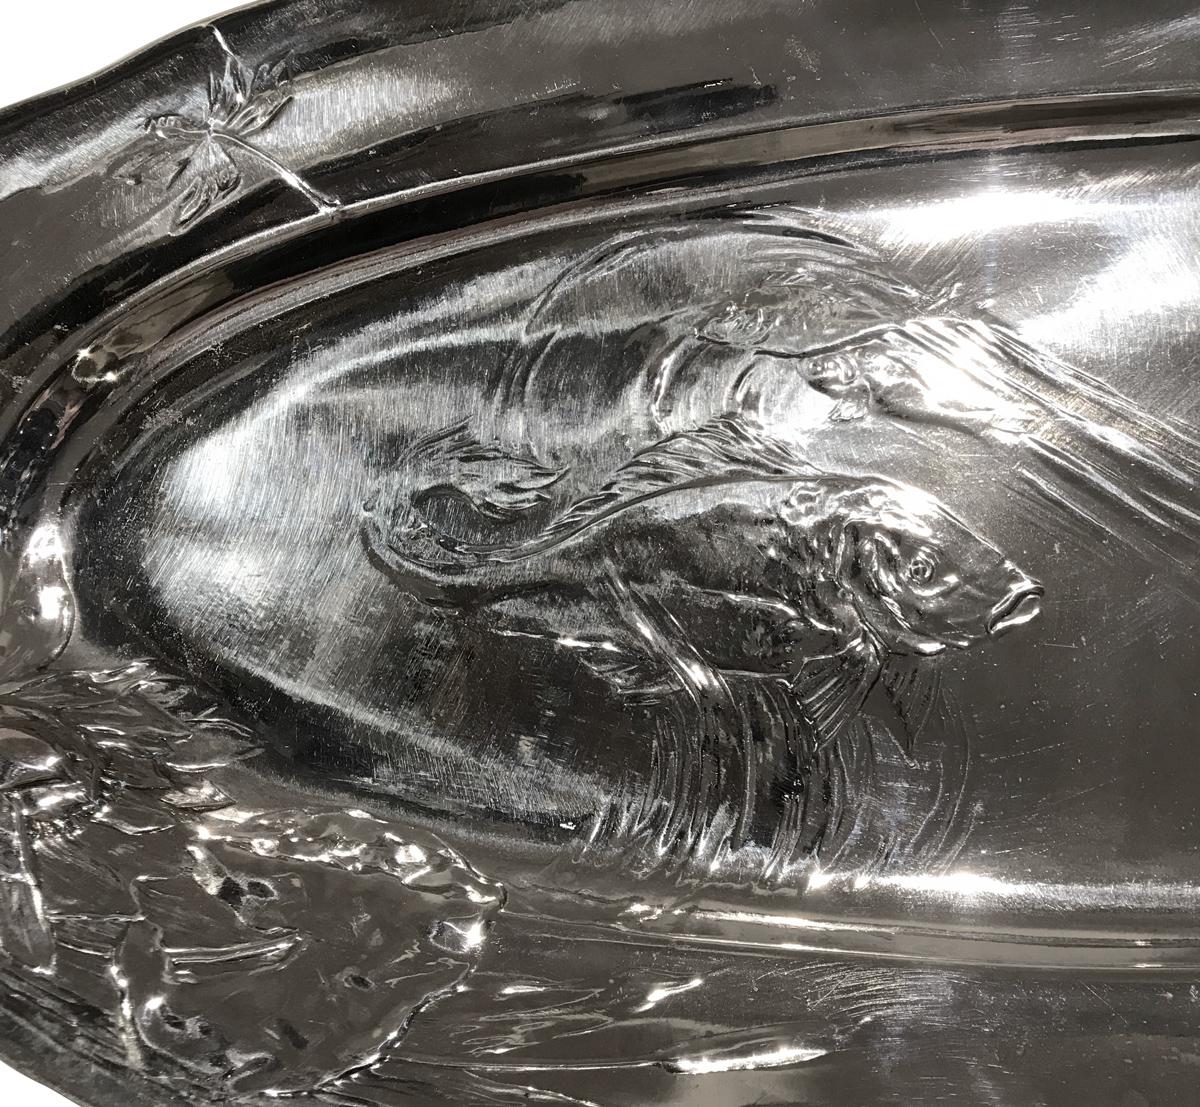 Kayserzinn Pewter Fish Platter. Jugendstil item decorated with fishes, a dragonfly, cyclamens and waterlilies on relief on the center and edges of the platter.
Very beautiful piece, designed by Hugo Leven (1874-1956) for the firm J.P. Kayser & Sohn